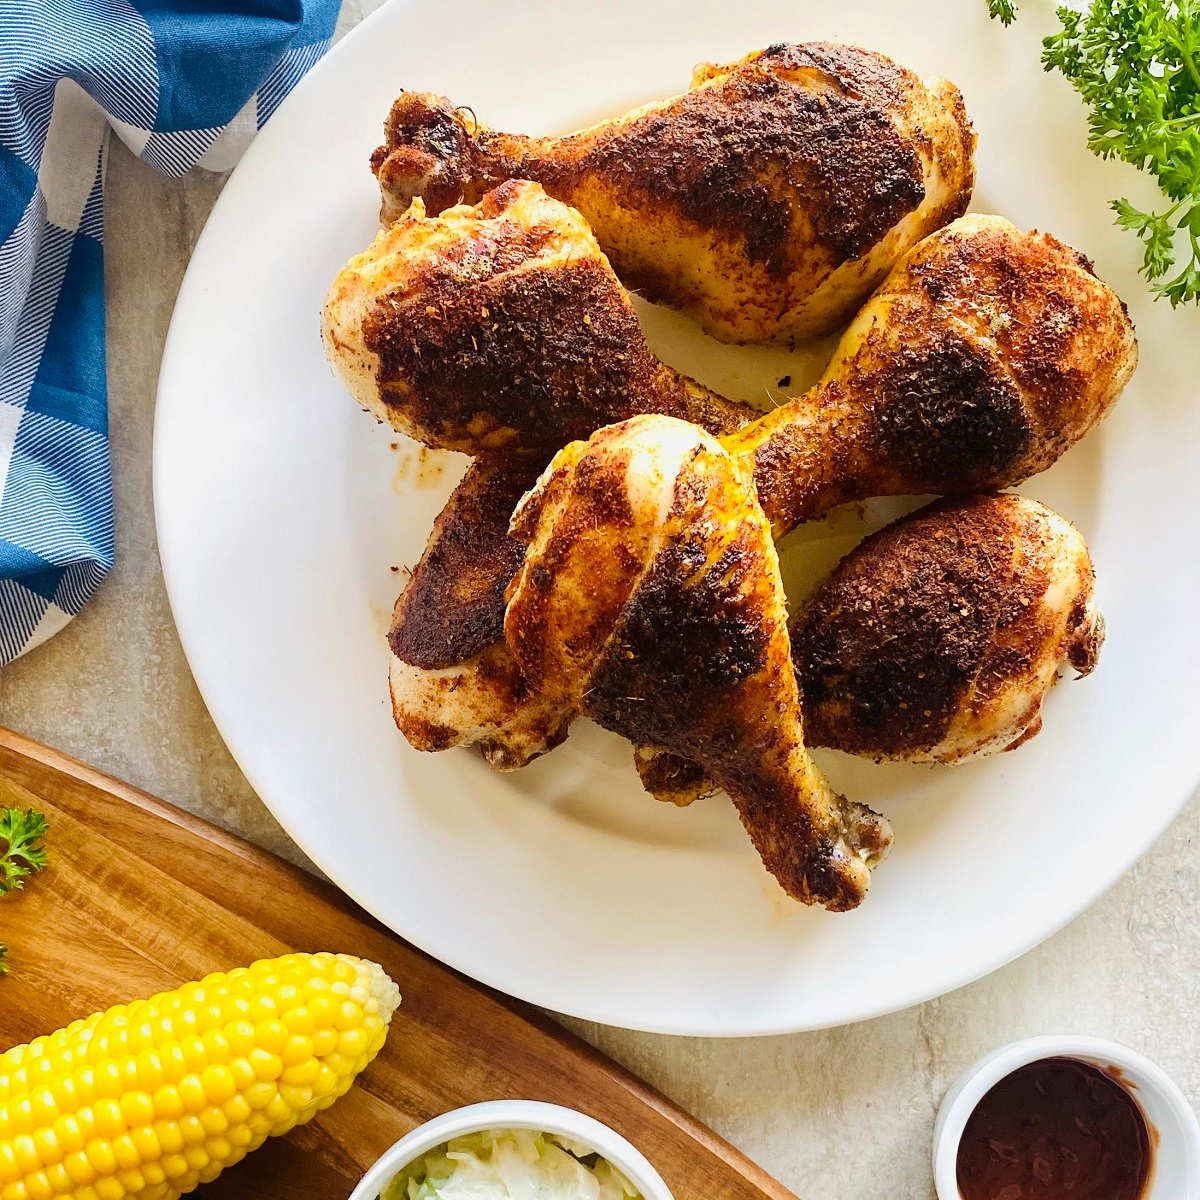 Smoked Chicken Legs drumsticks on plate with corn and coleslaw sides.